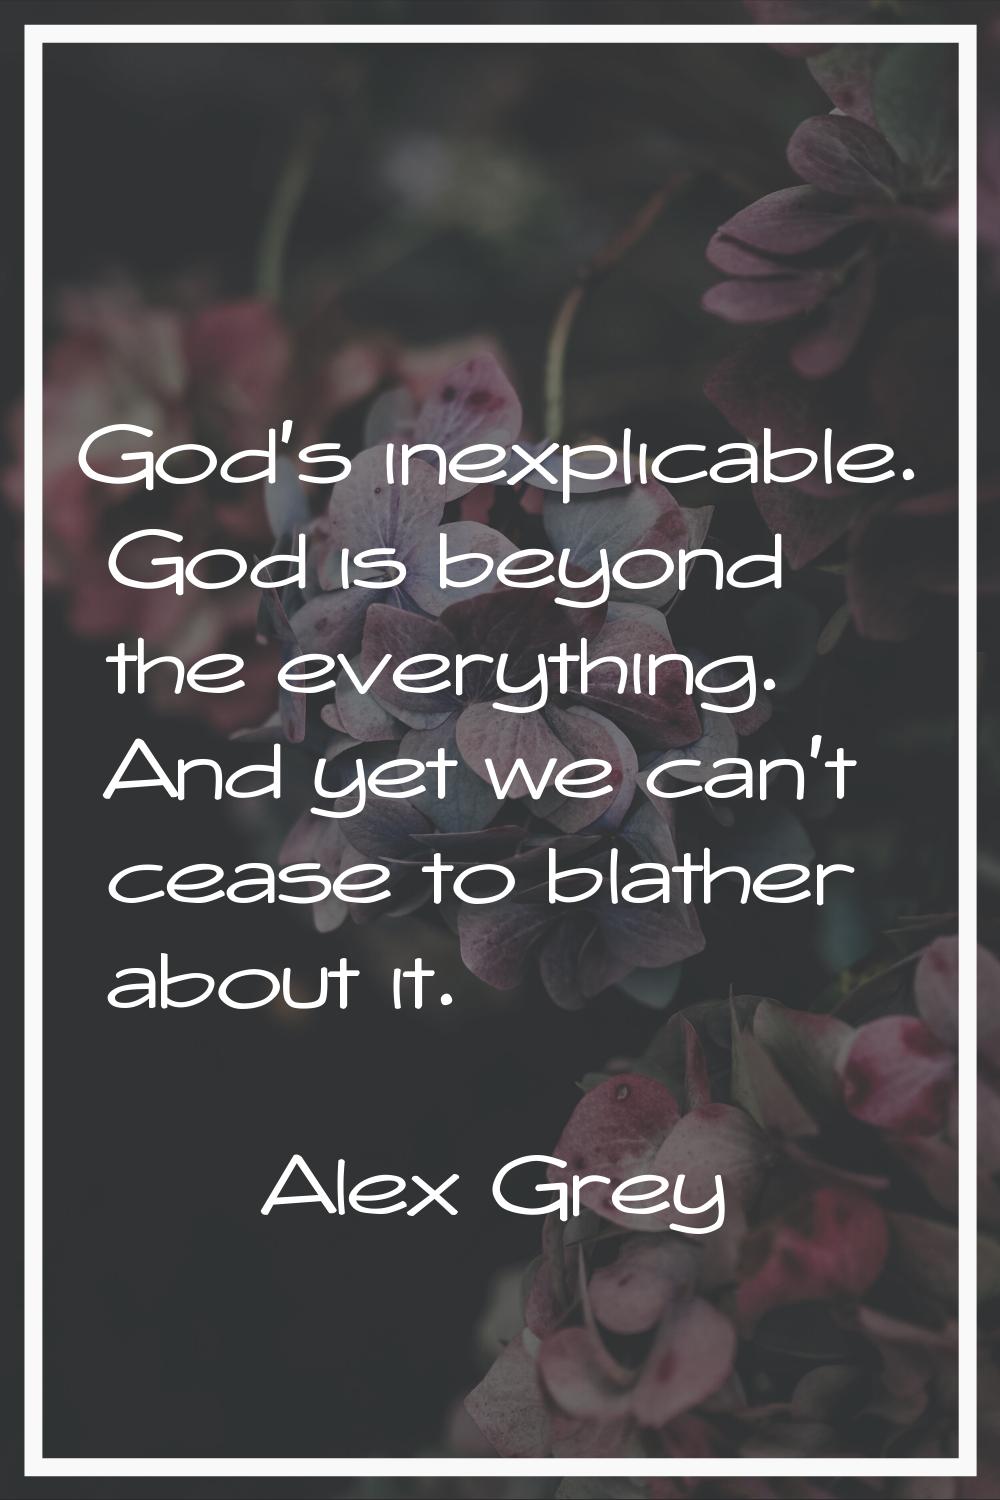 God's inexplicable. God is beyond the everything. And yet we can't cease to blather about it.